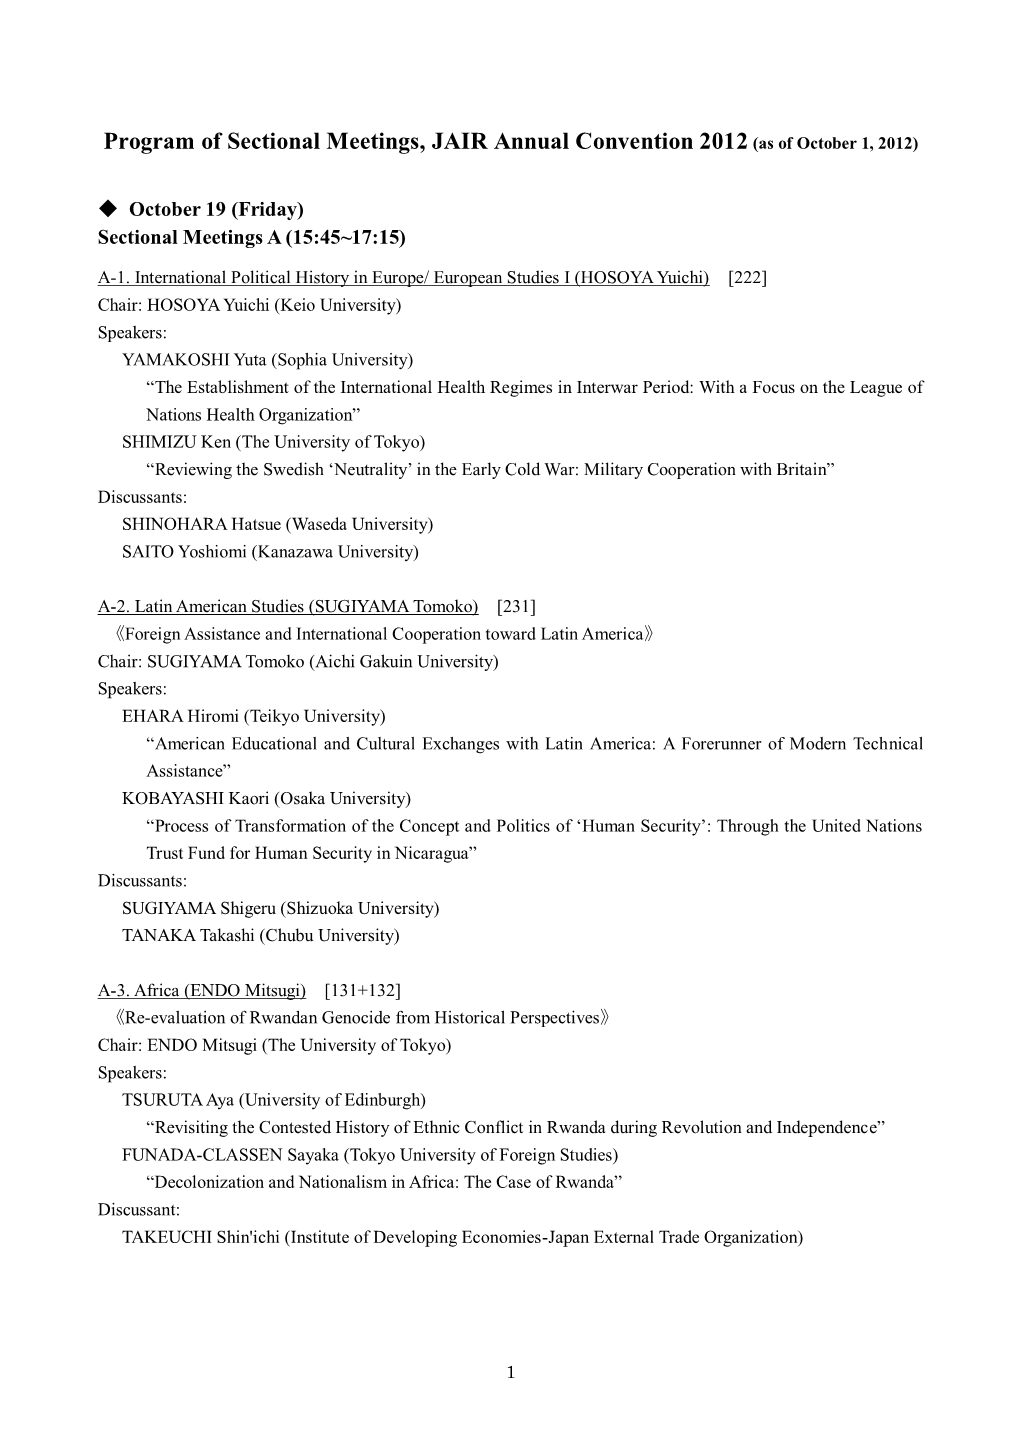 Program of Sectional Meetings, JAIR Annual Convention 2012 (As of October 1, 2012)